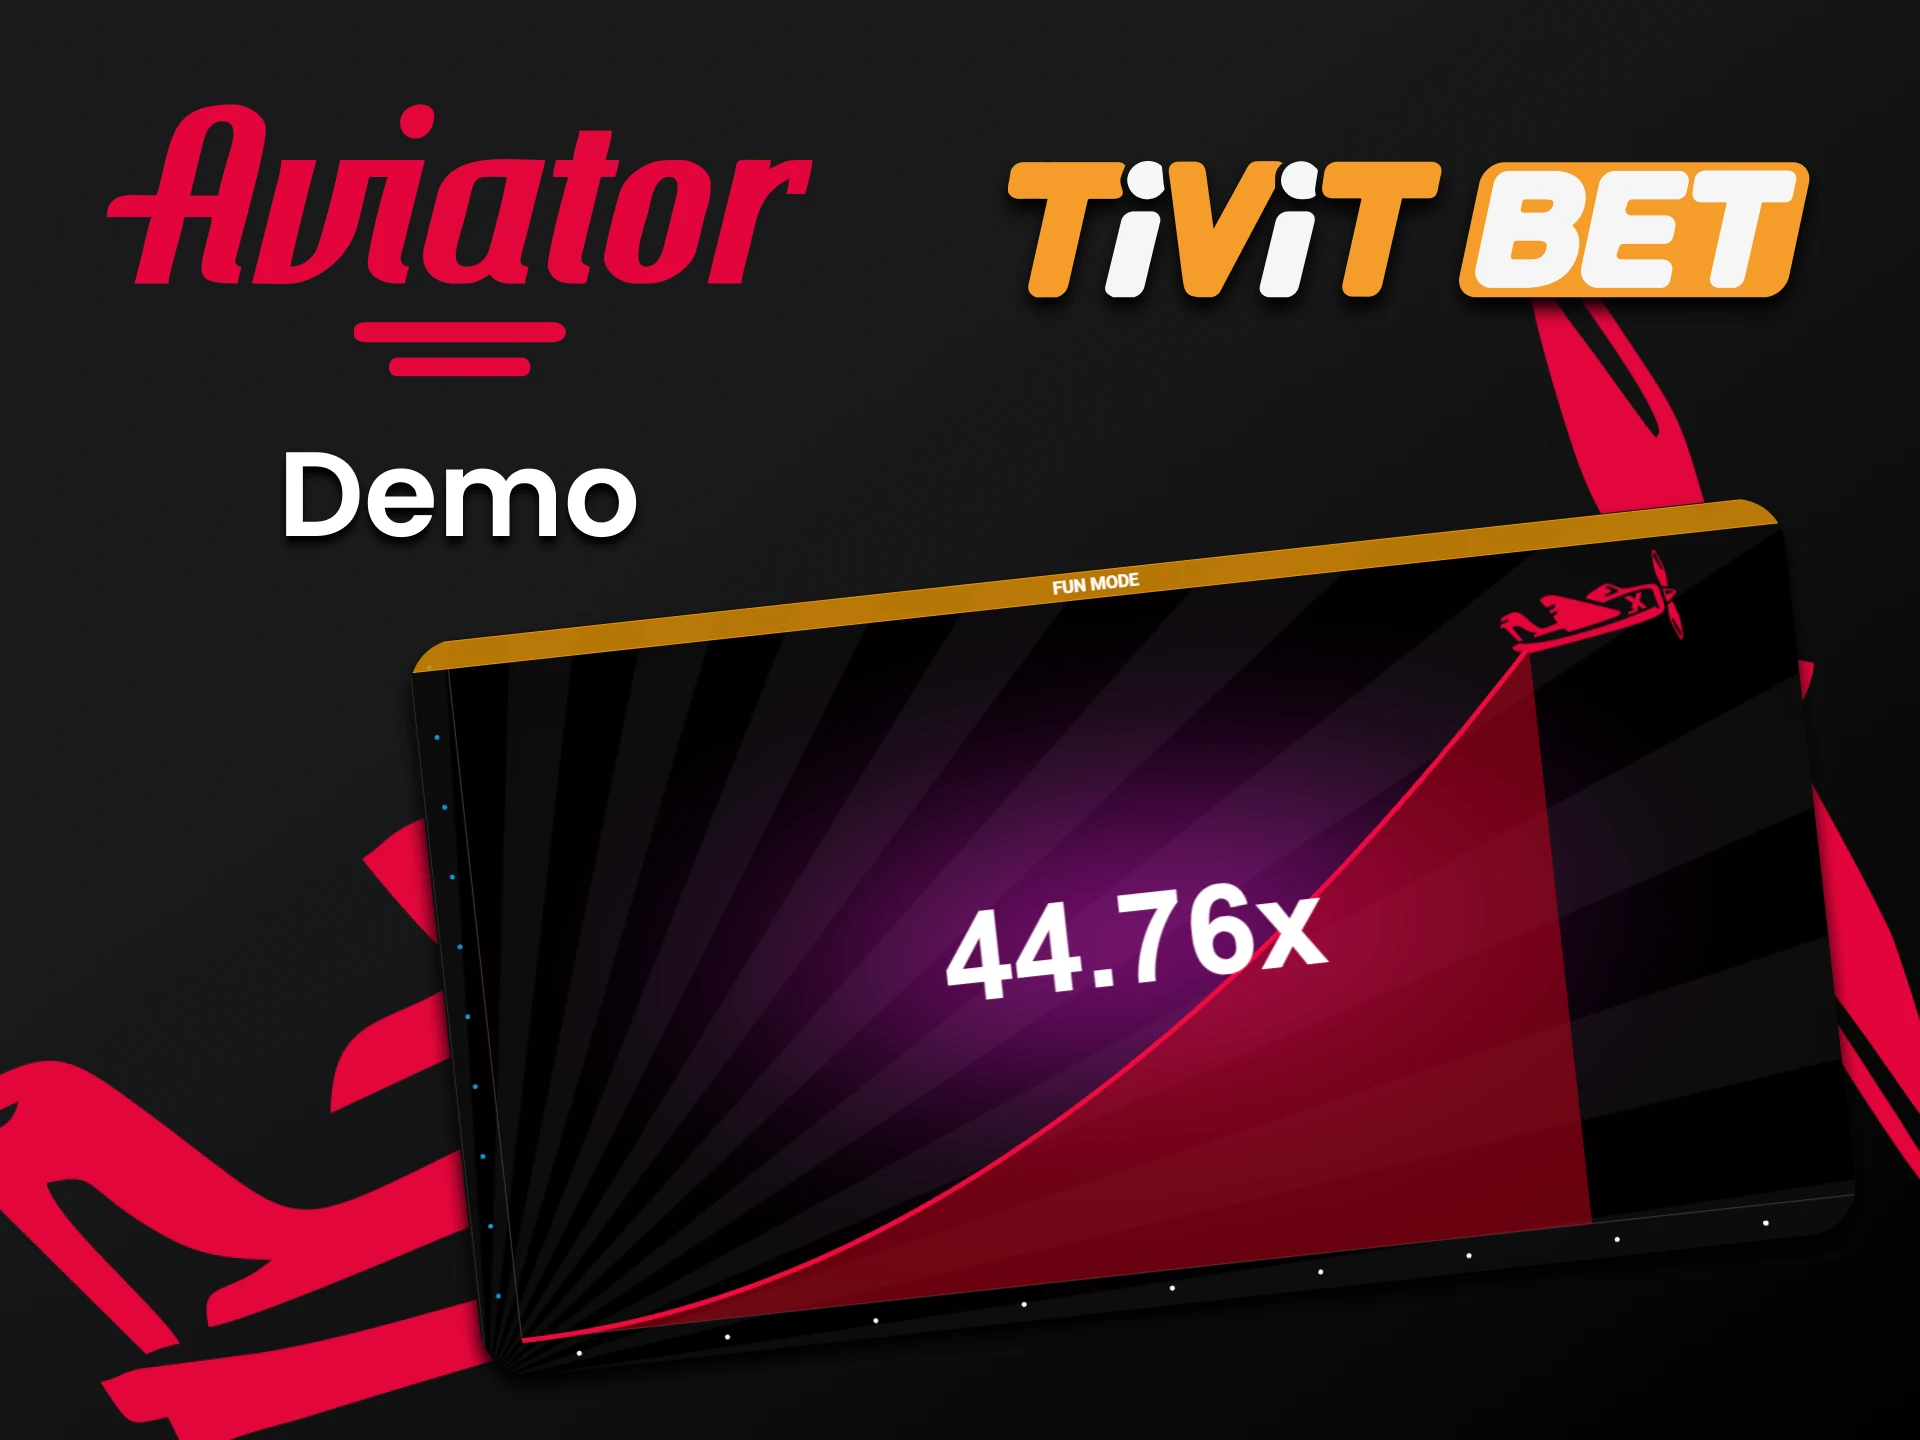 Tivitbet has a demo version of the game Aviator.